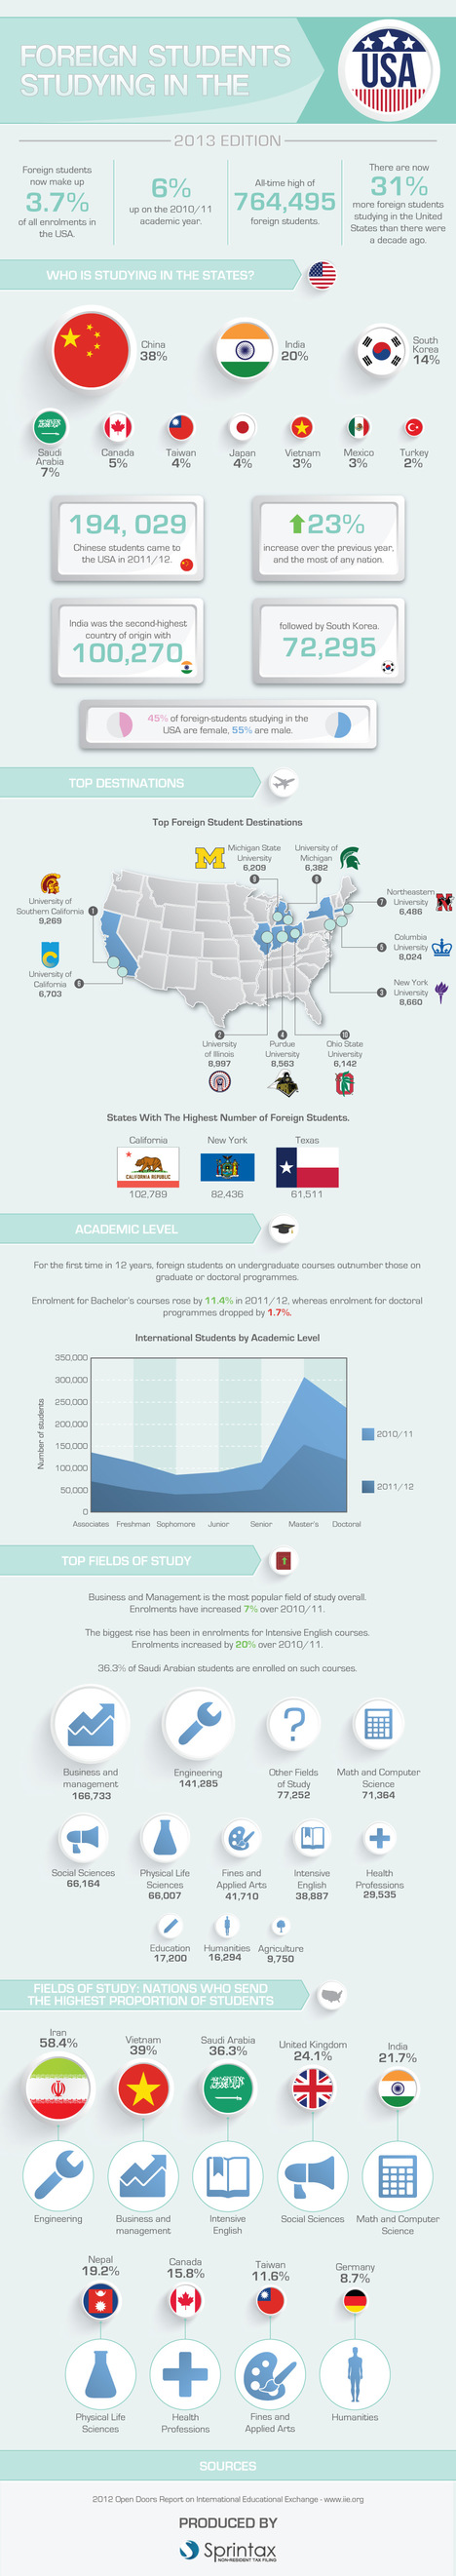 Foreign Students Studying in the USA (Infographic)